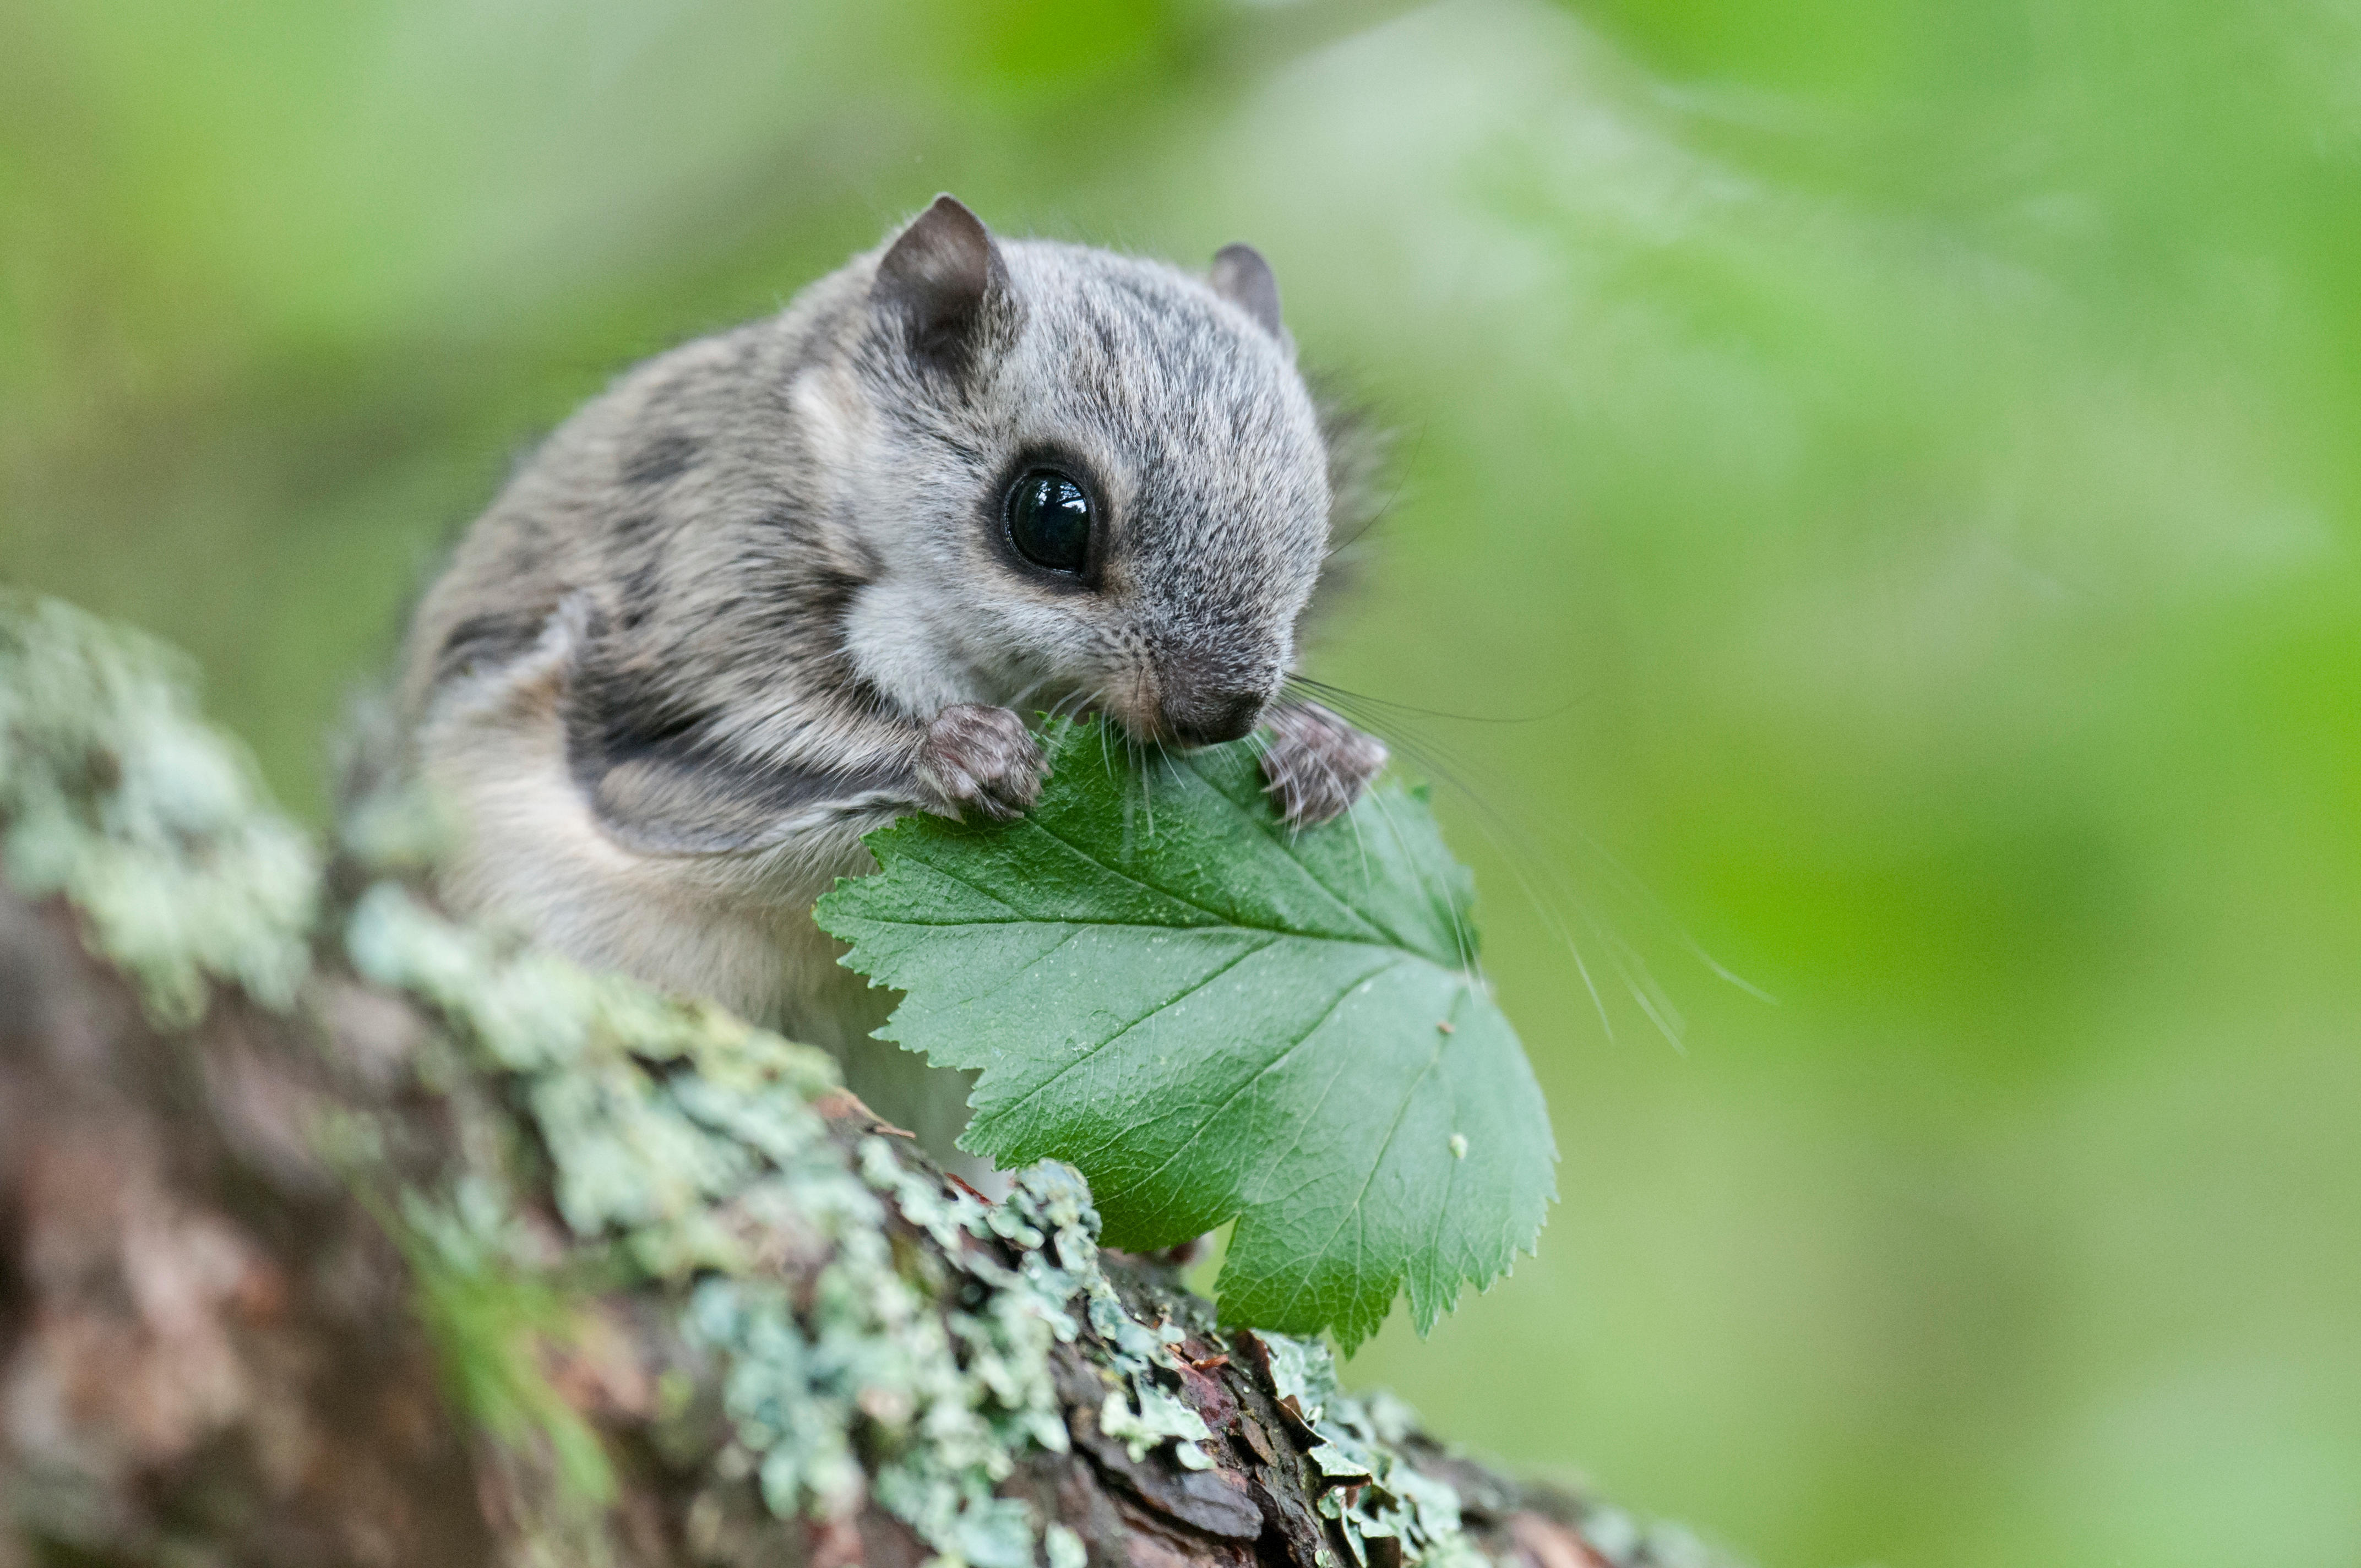 The Siberian flying squirrel is Japanese anime brought to life